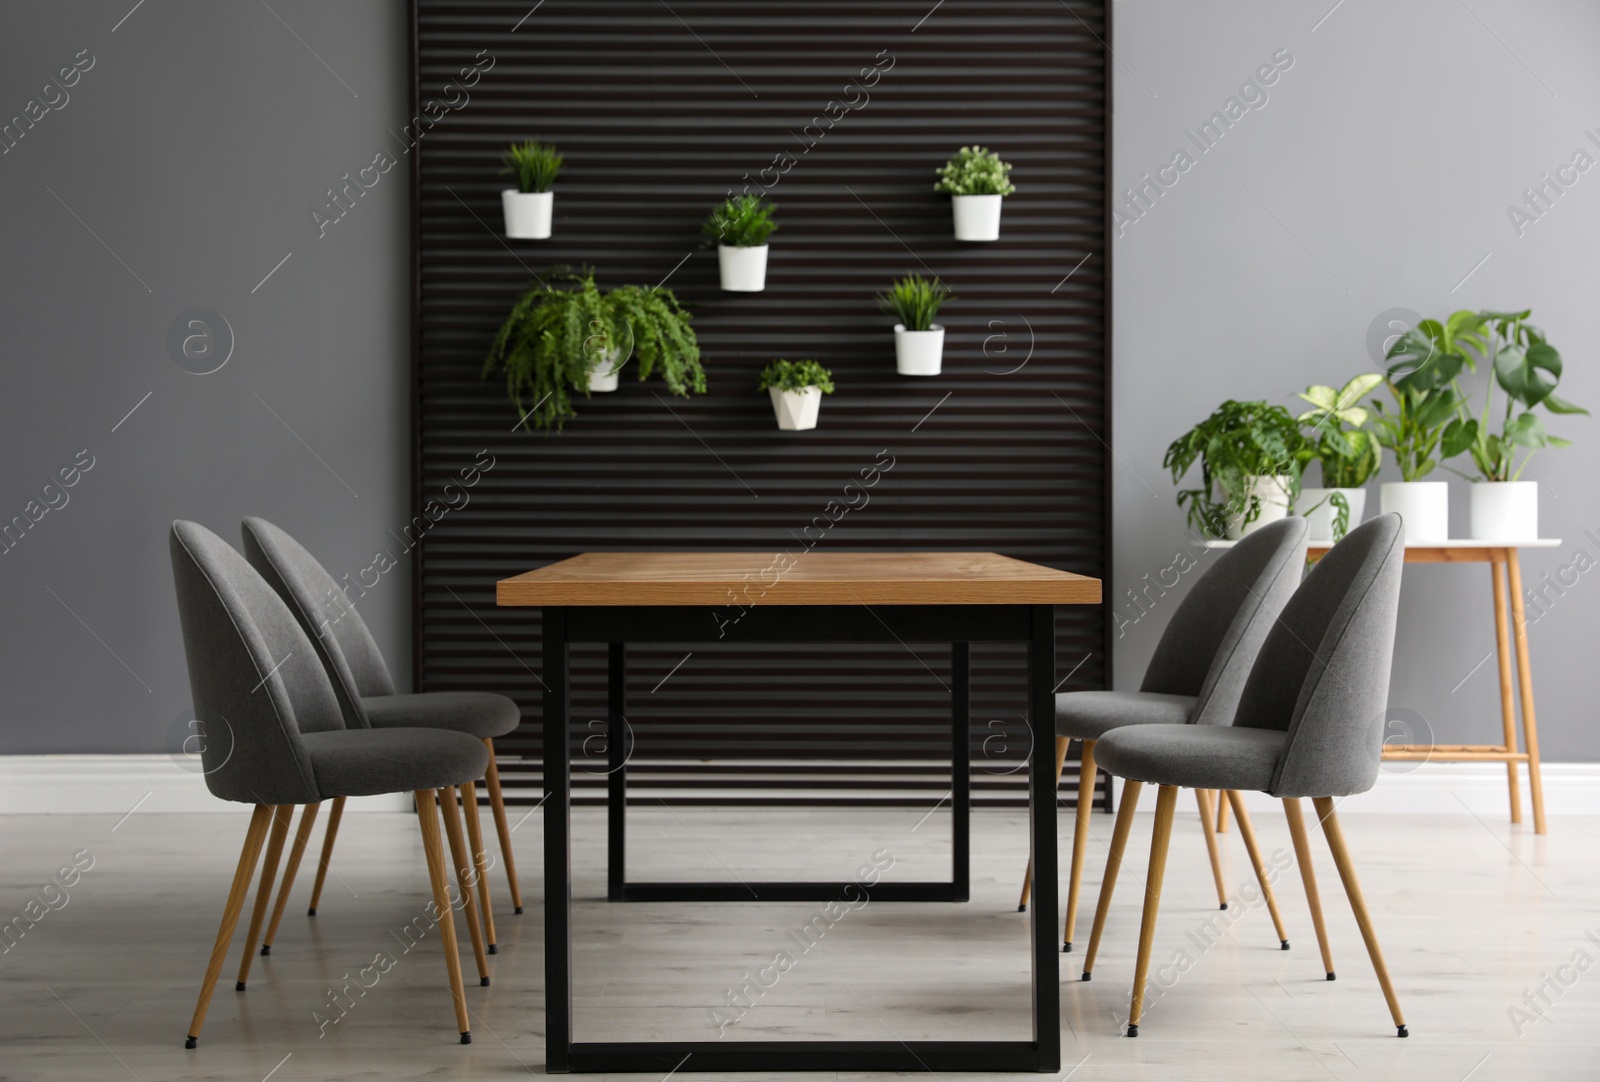 Photo of Stylish room with table, chairs and plants. Interior design